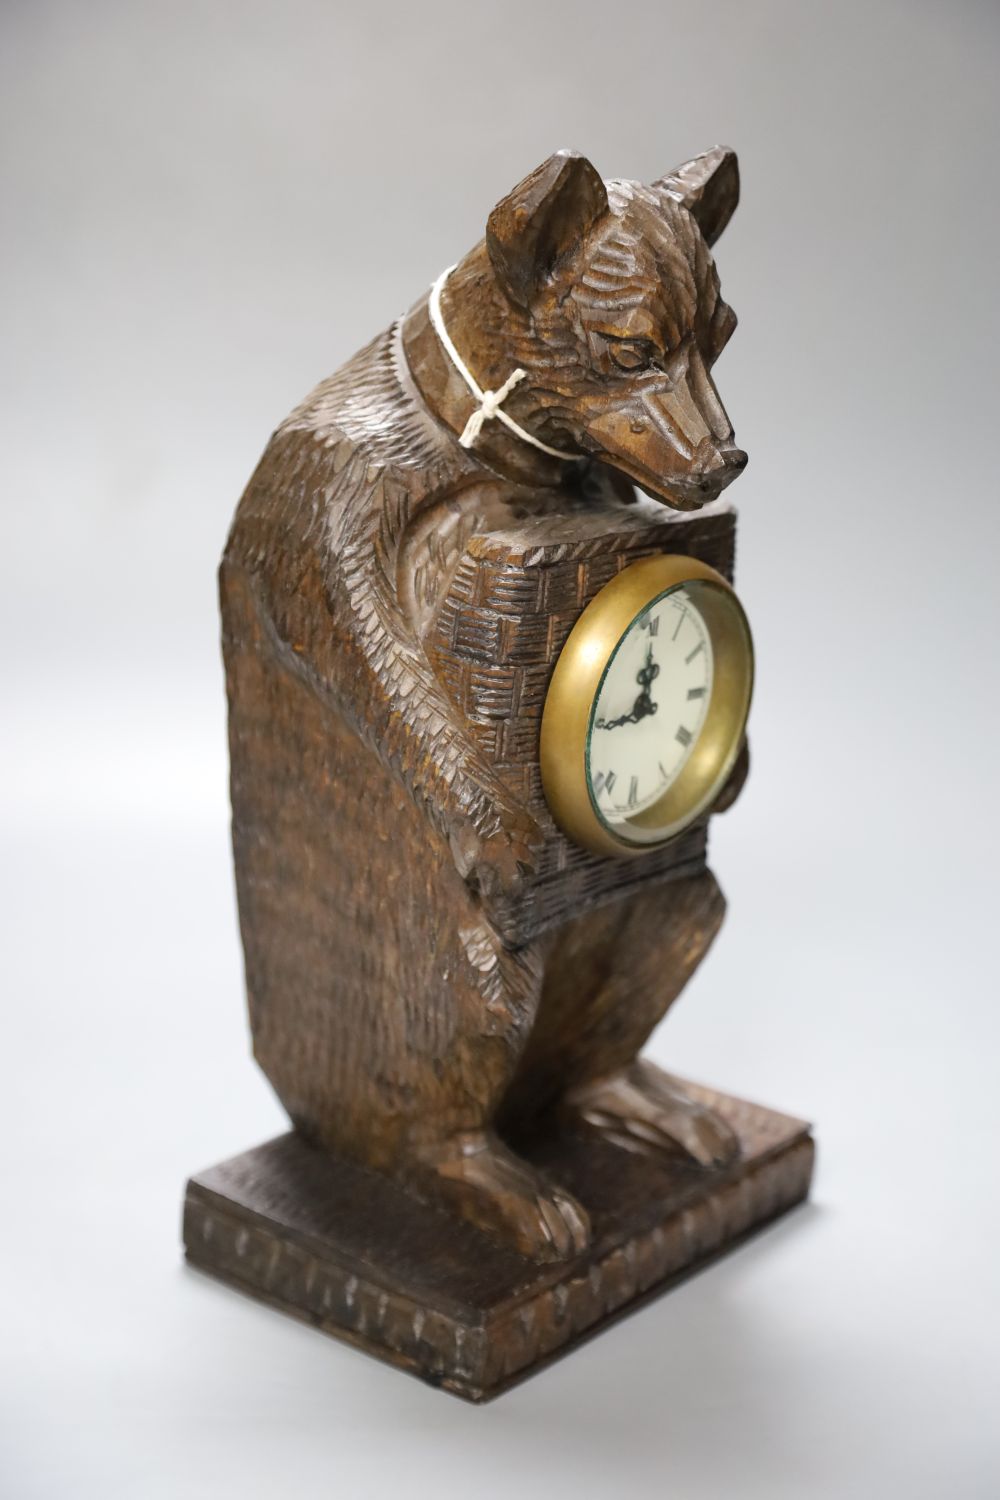 A modern carved pine bear timepiece in Black Forest style, 13cmCONDITION: Good condition - Image 2 of 4